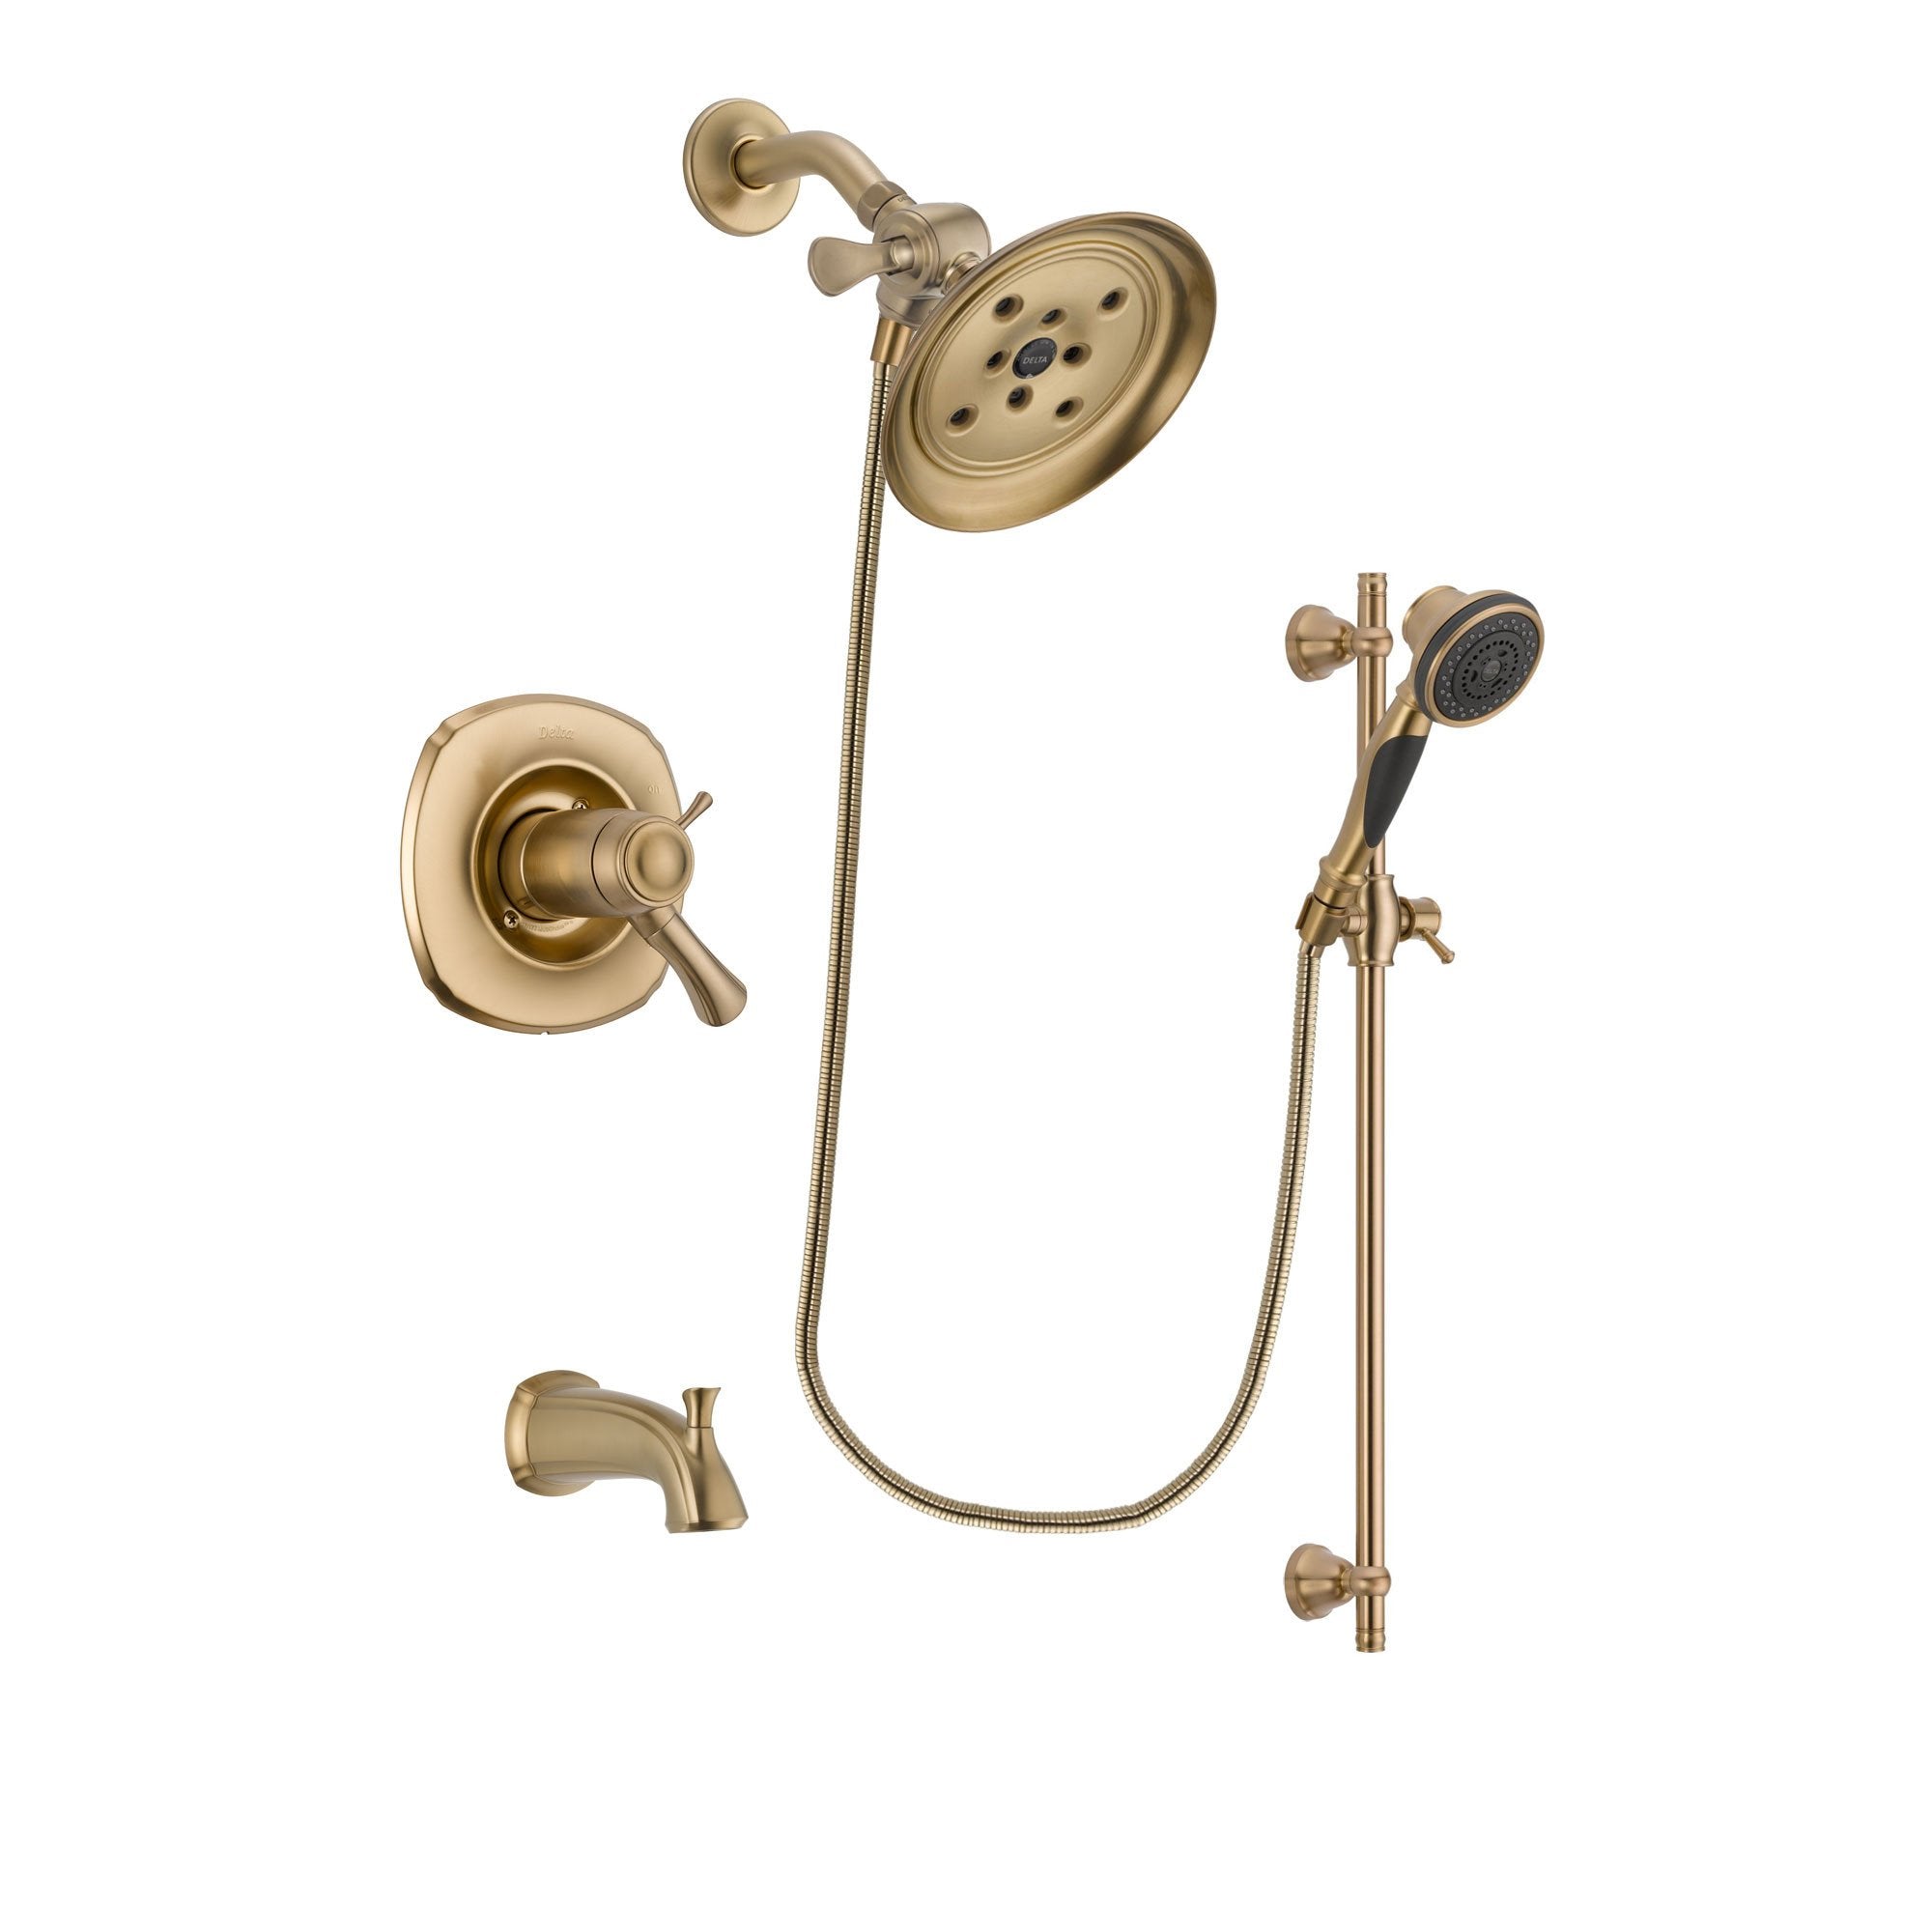 Delta Addison Champagne Bronze Finish Thermostatic Tub and Shower Faucet System Package with Large Rain Shower Head and Personal Handheld Shower Spray with Slide Bar Includes Rough-in Valve and Tub Spout DSP3581V